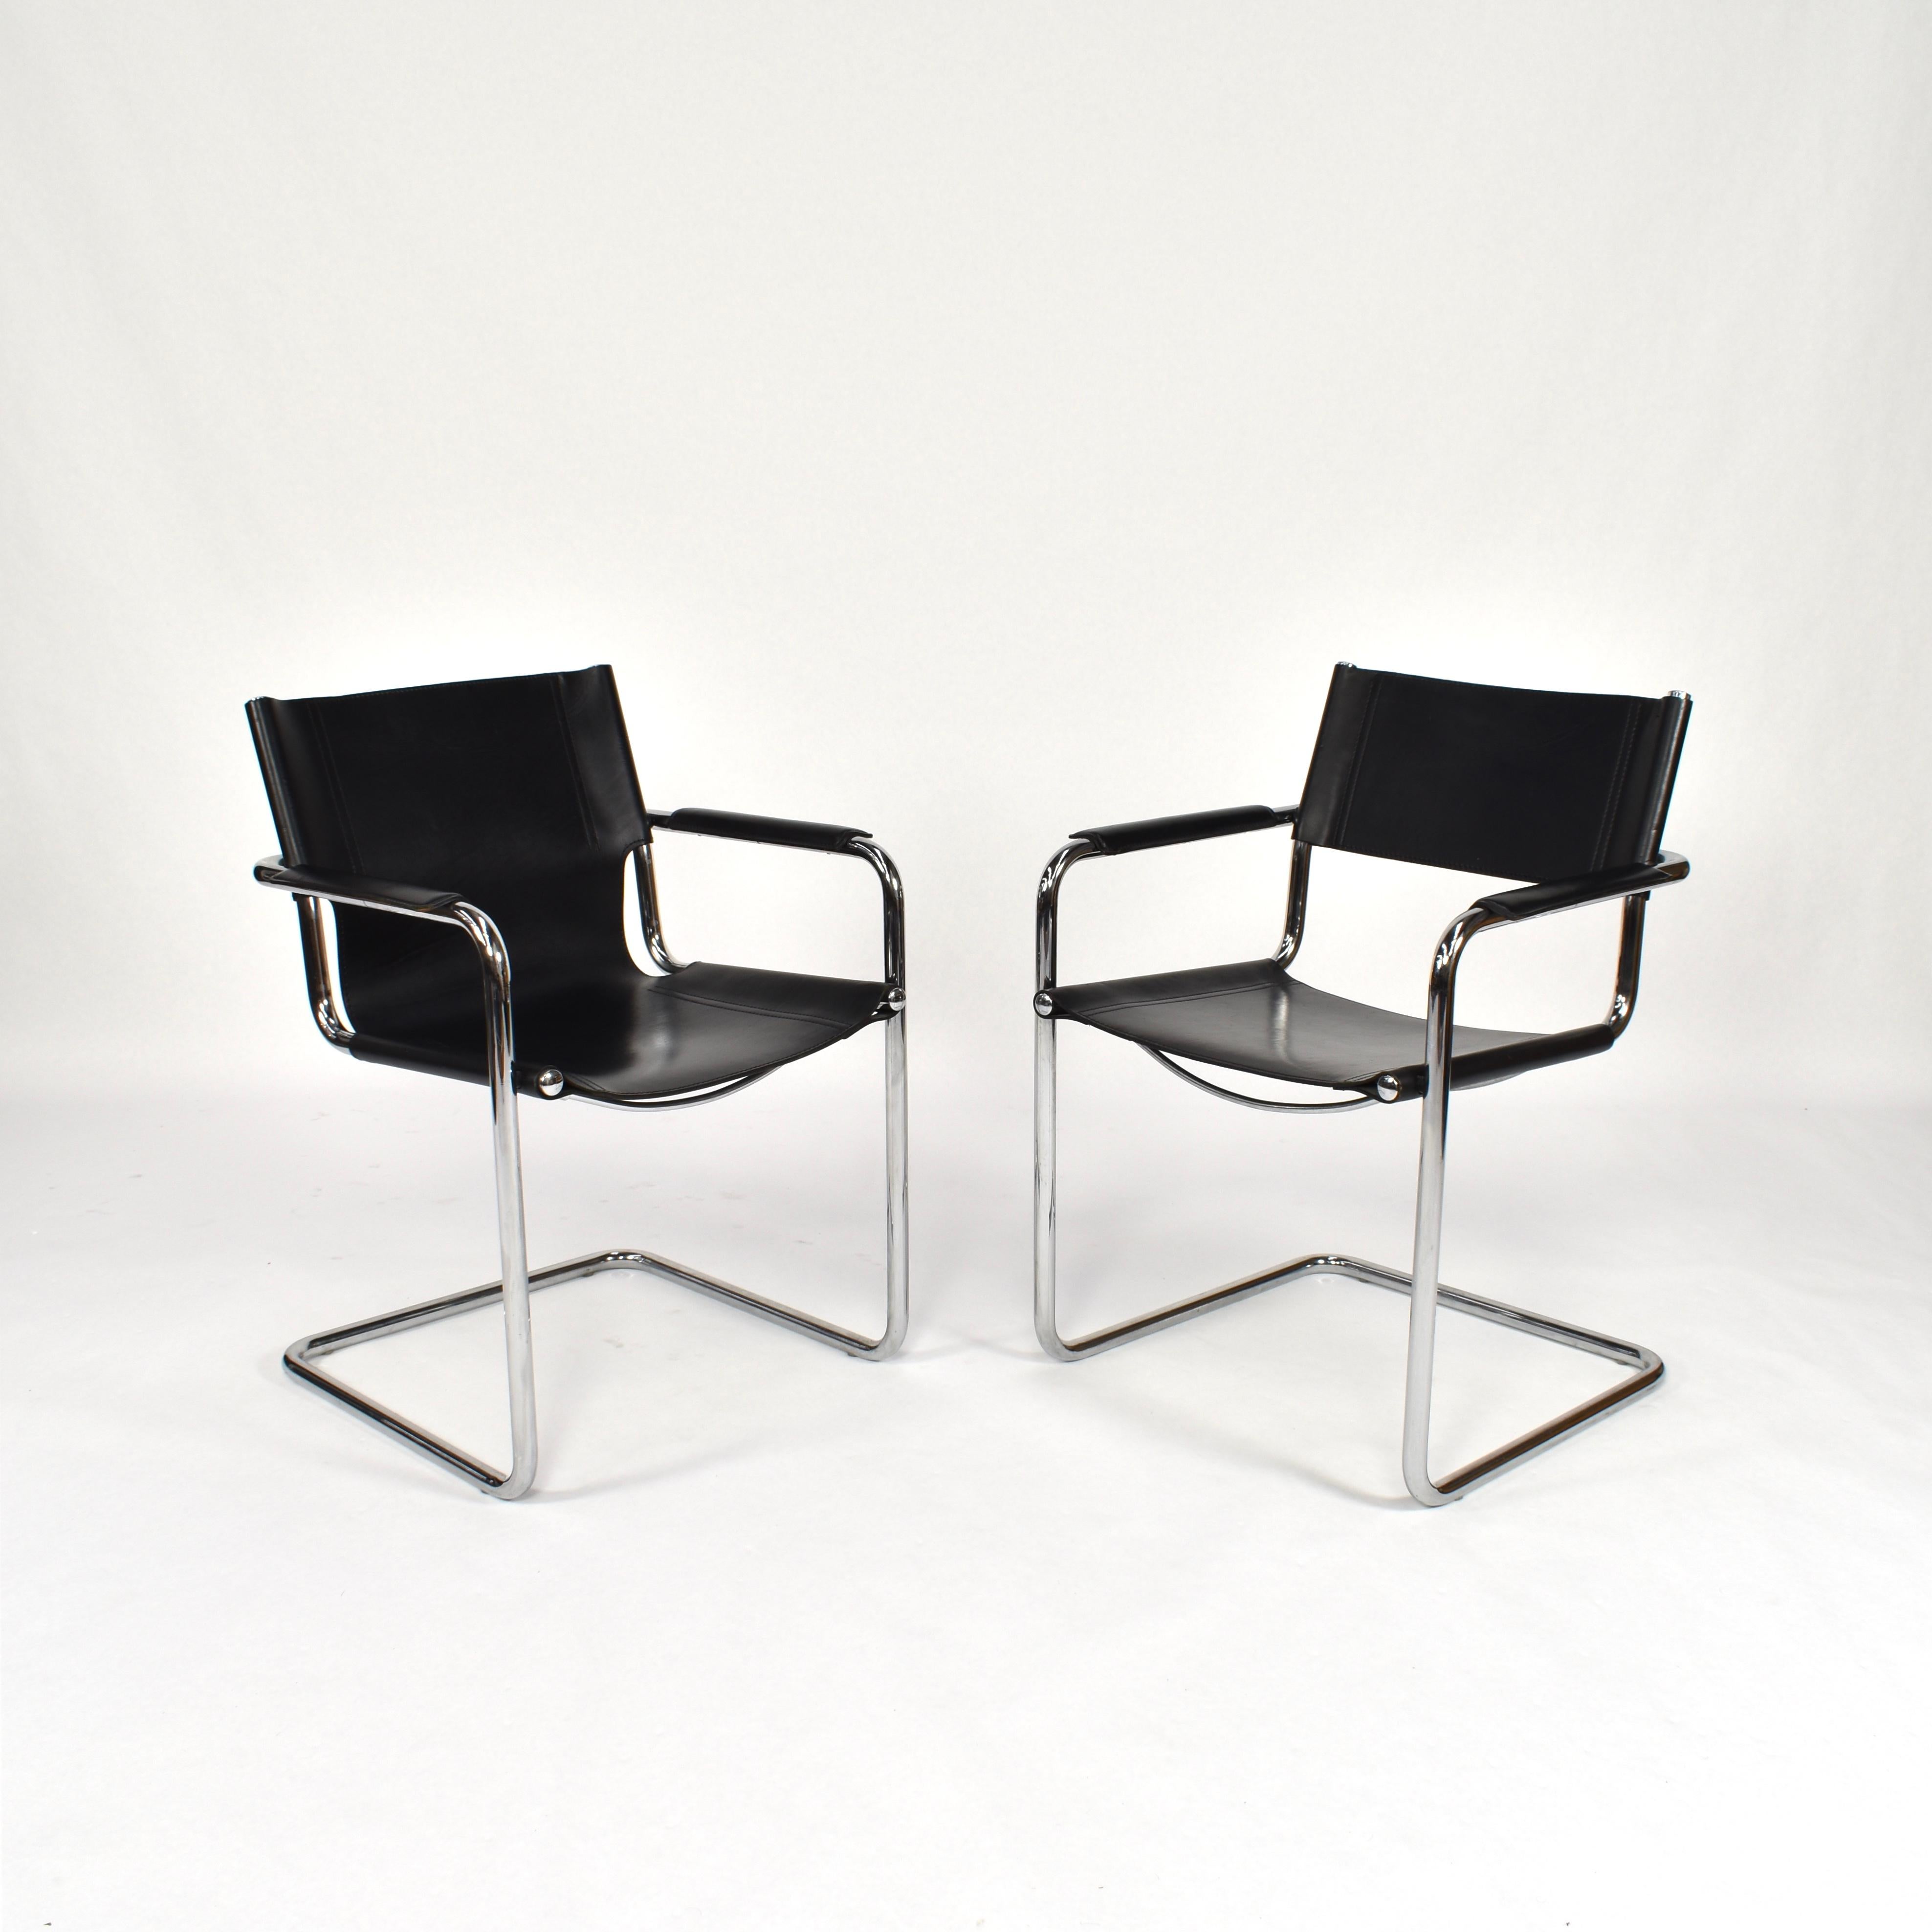 Set of 4 Bauhaus chairs designed by Mart Stam for Matteo Grassi in the 1970s. In the style of Marcel Breuer. The chairs feature leather seating and chrome tubular bases. Two chairs have closed leather seats and two chairs open leather